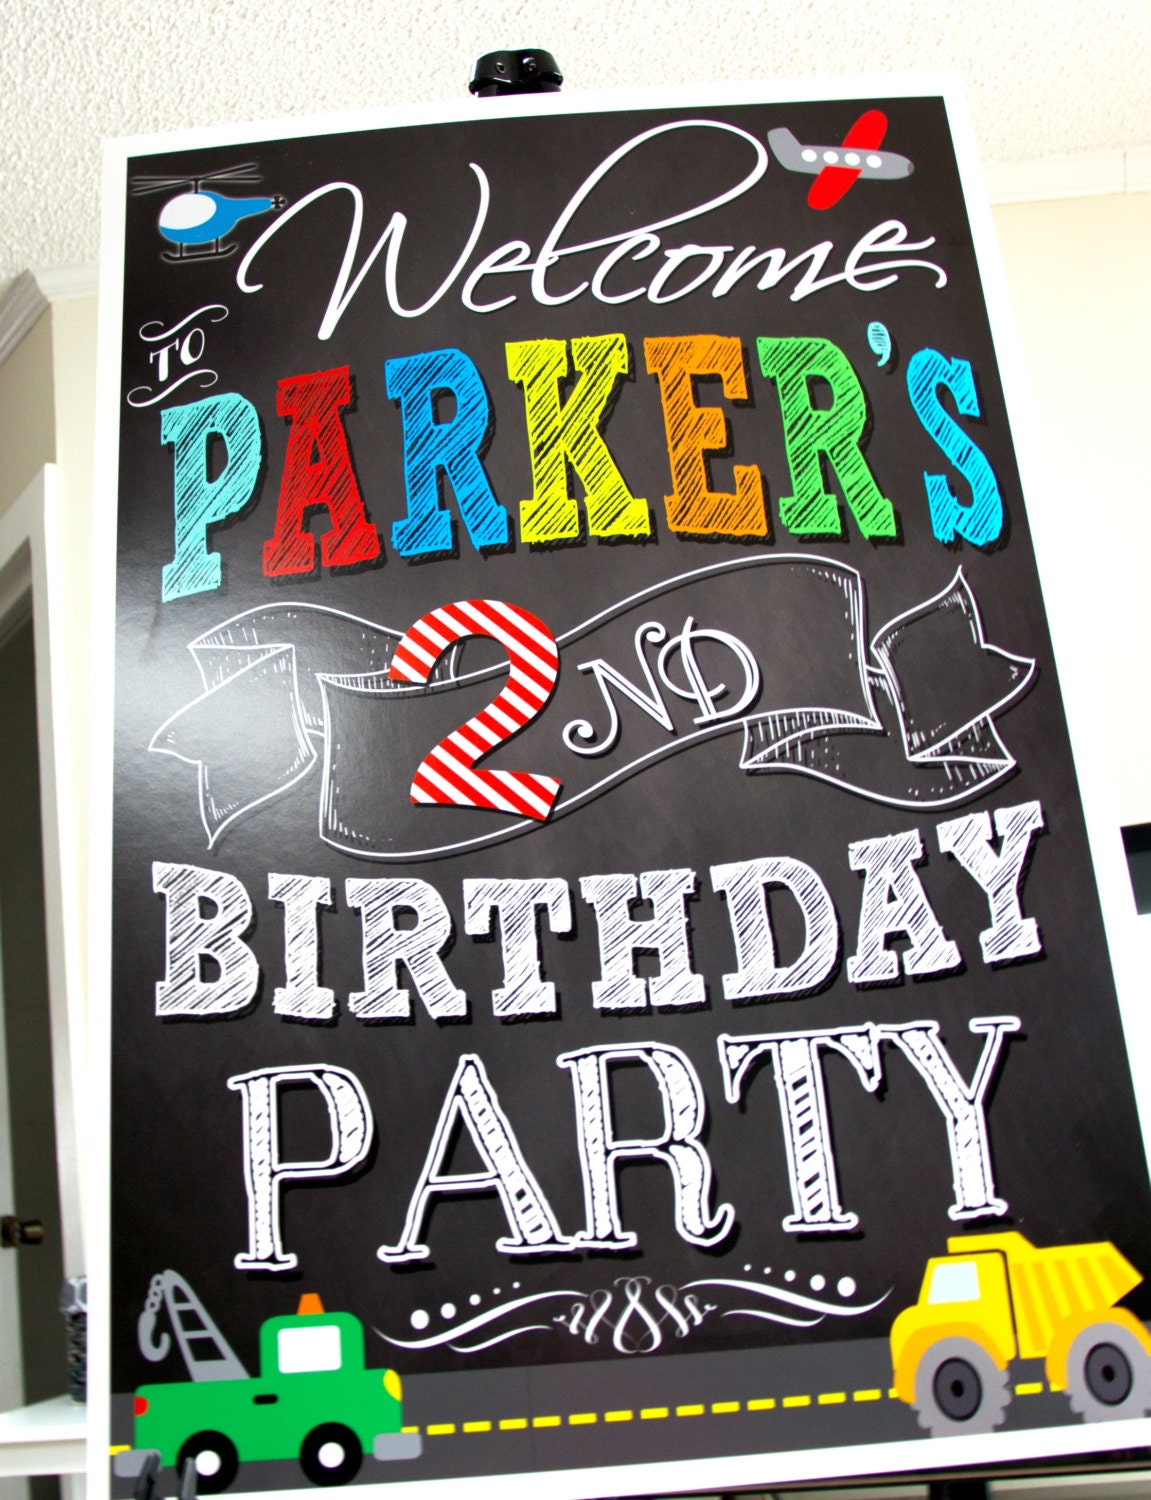 How To Throw a Book Themed Birthday Party — On Book Street